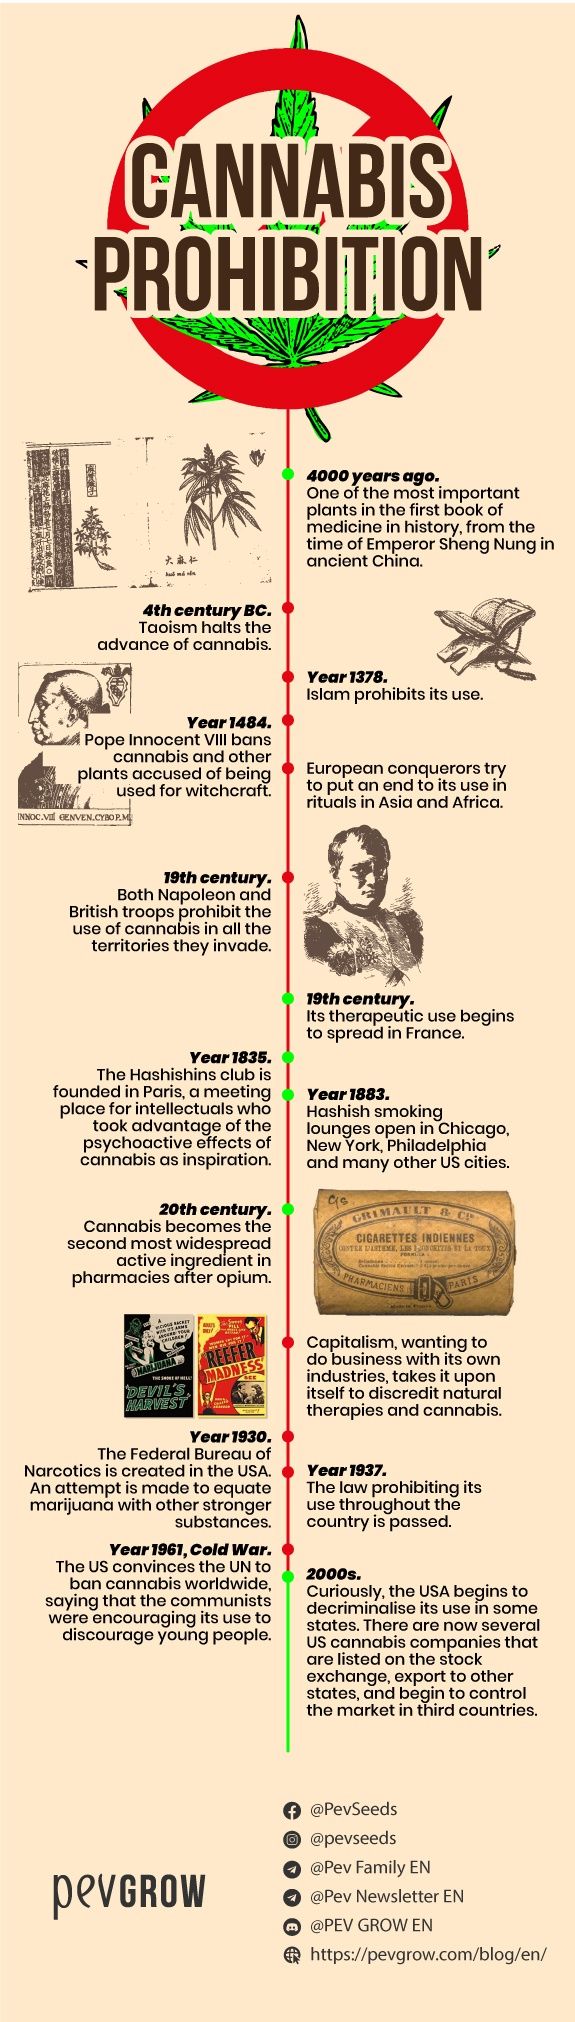 Infographic on the history of cannabis prohibition